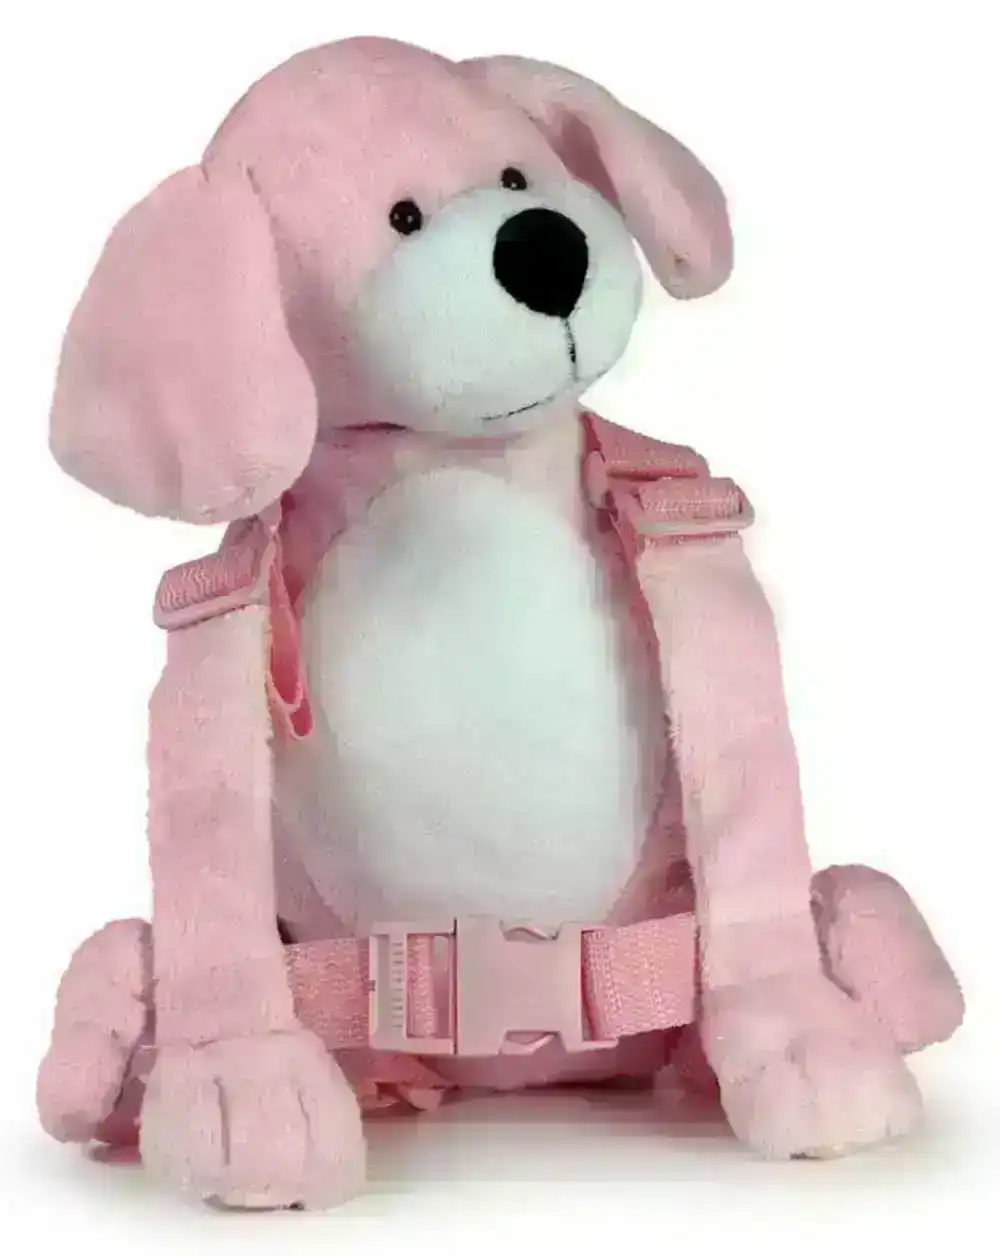 Playette 2in1 Travel Harness Buddy/Adjustable Strap Baby/Kids 18m-4y Pink Puppy